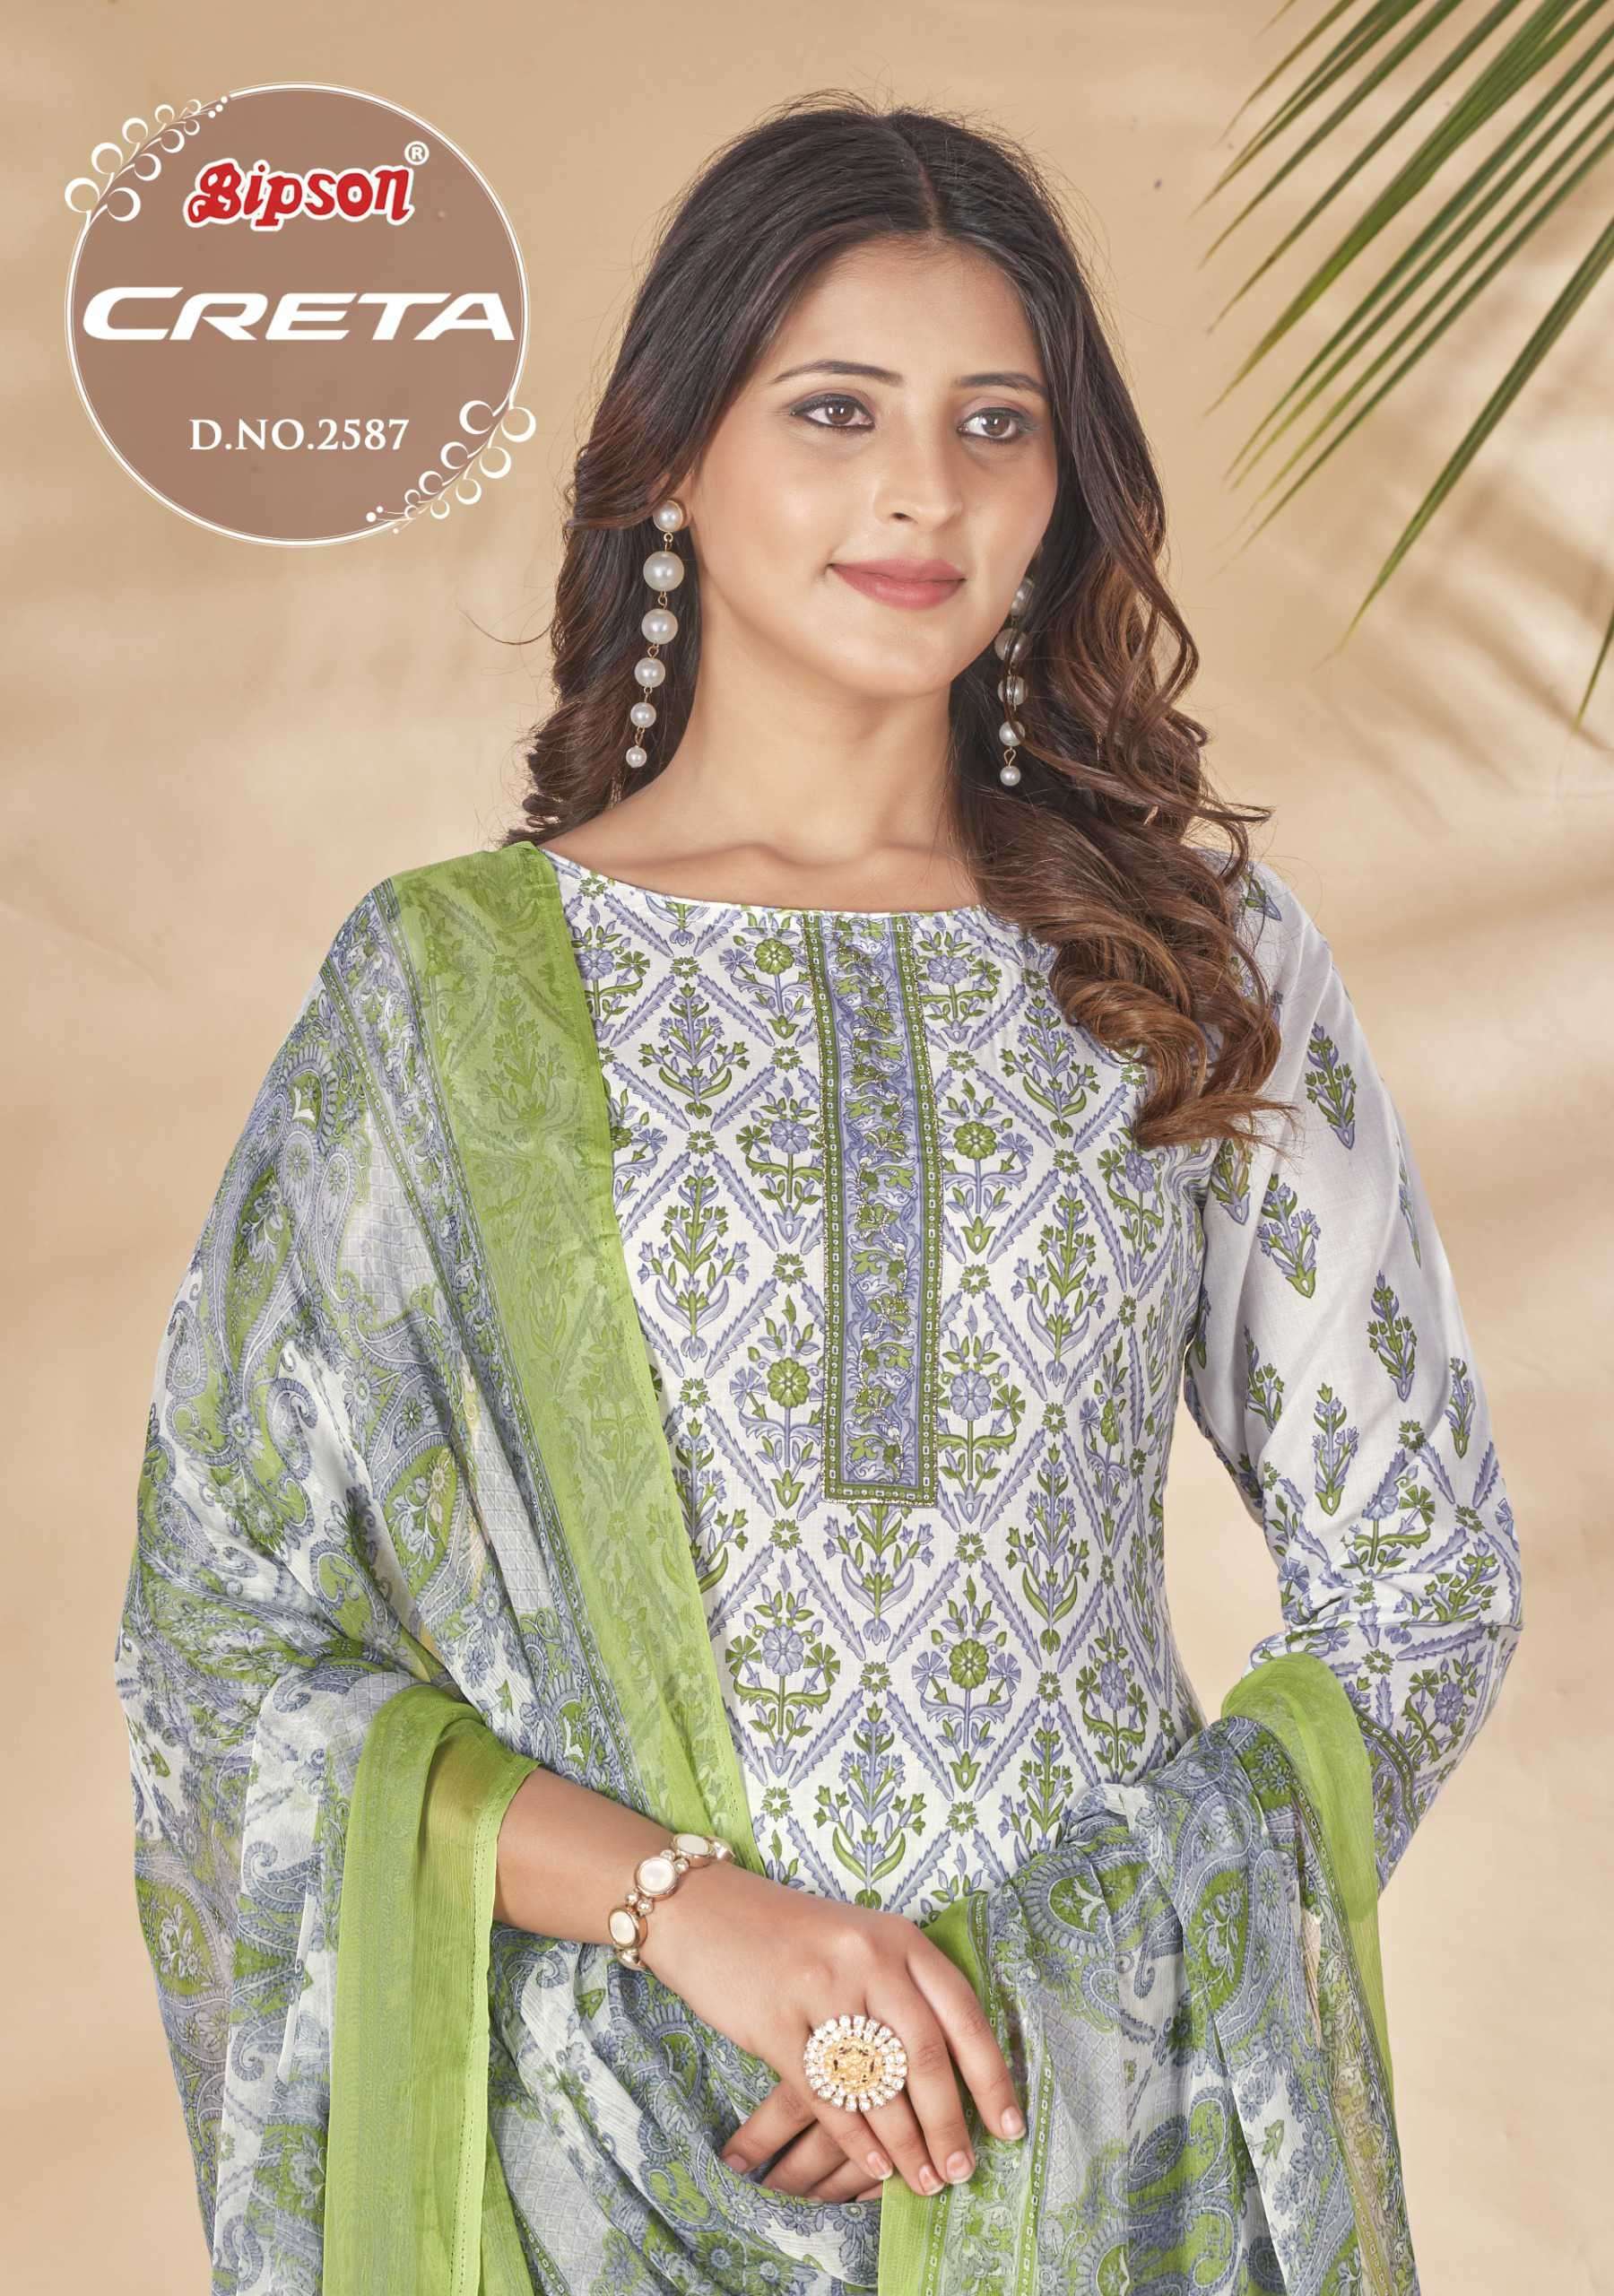 Bipson Creta 2587 COTTON WITH PRINTED SUMMER WEAR DRESS MATERIAL COLLECTION AT BEST WHOLESALE RATE